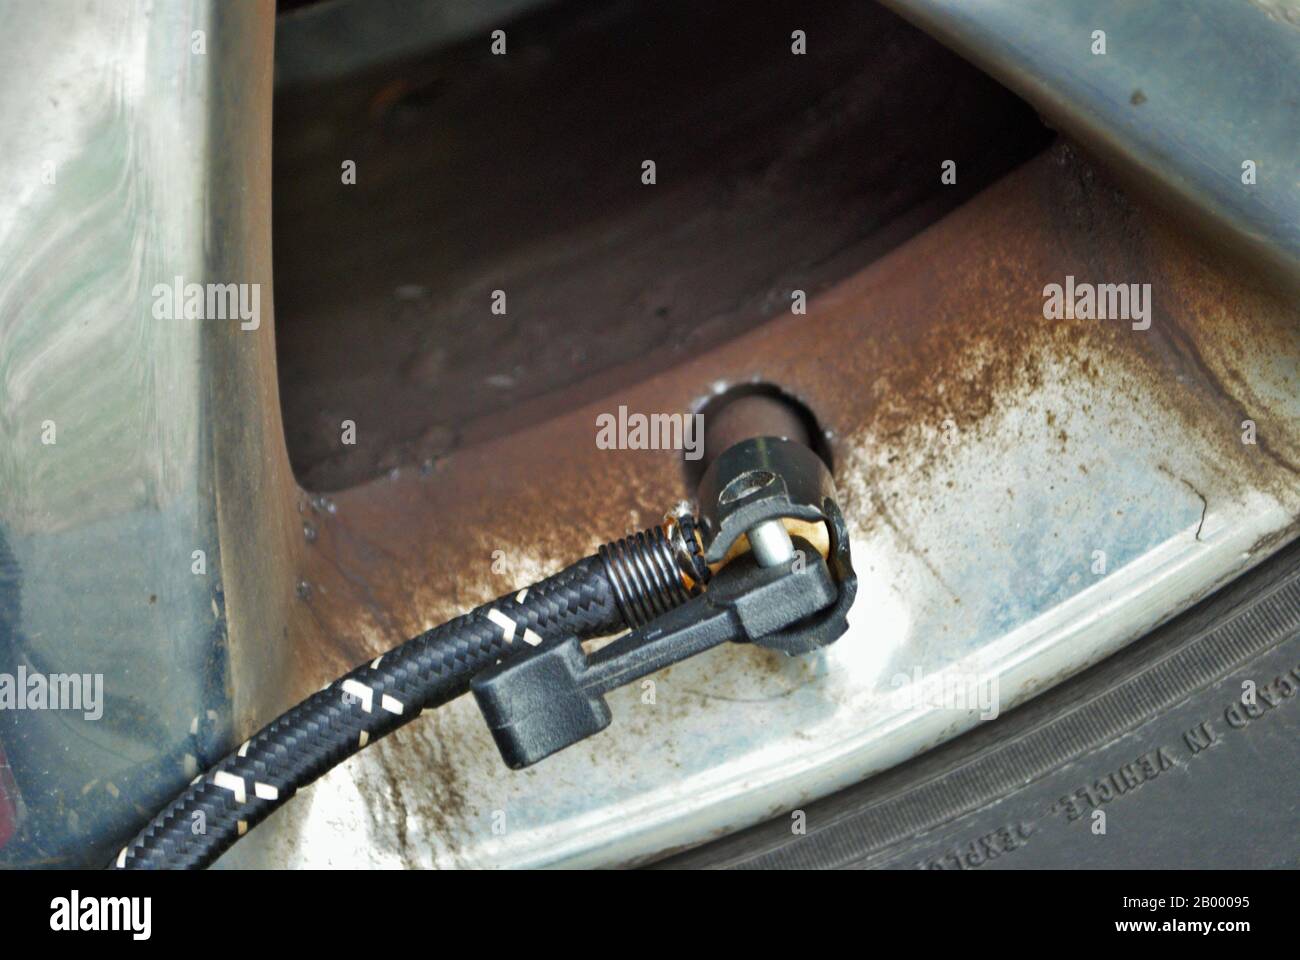 close up of a portable air compressor connected to the valve stem of a car tire Stock Photo